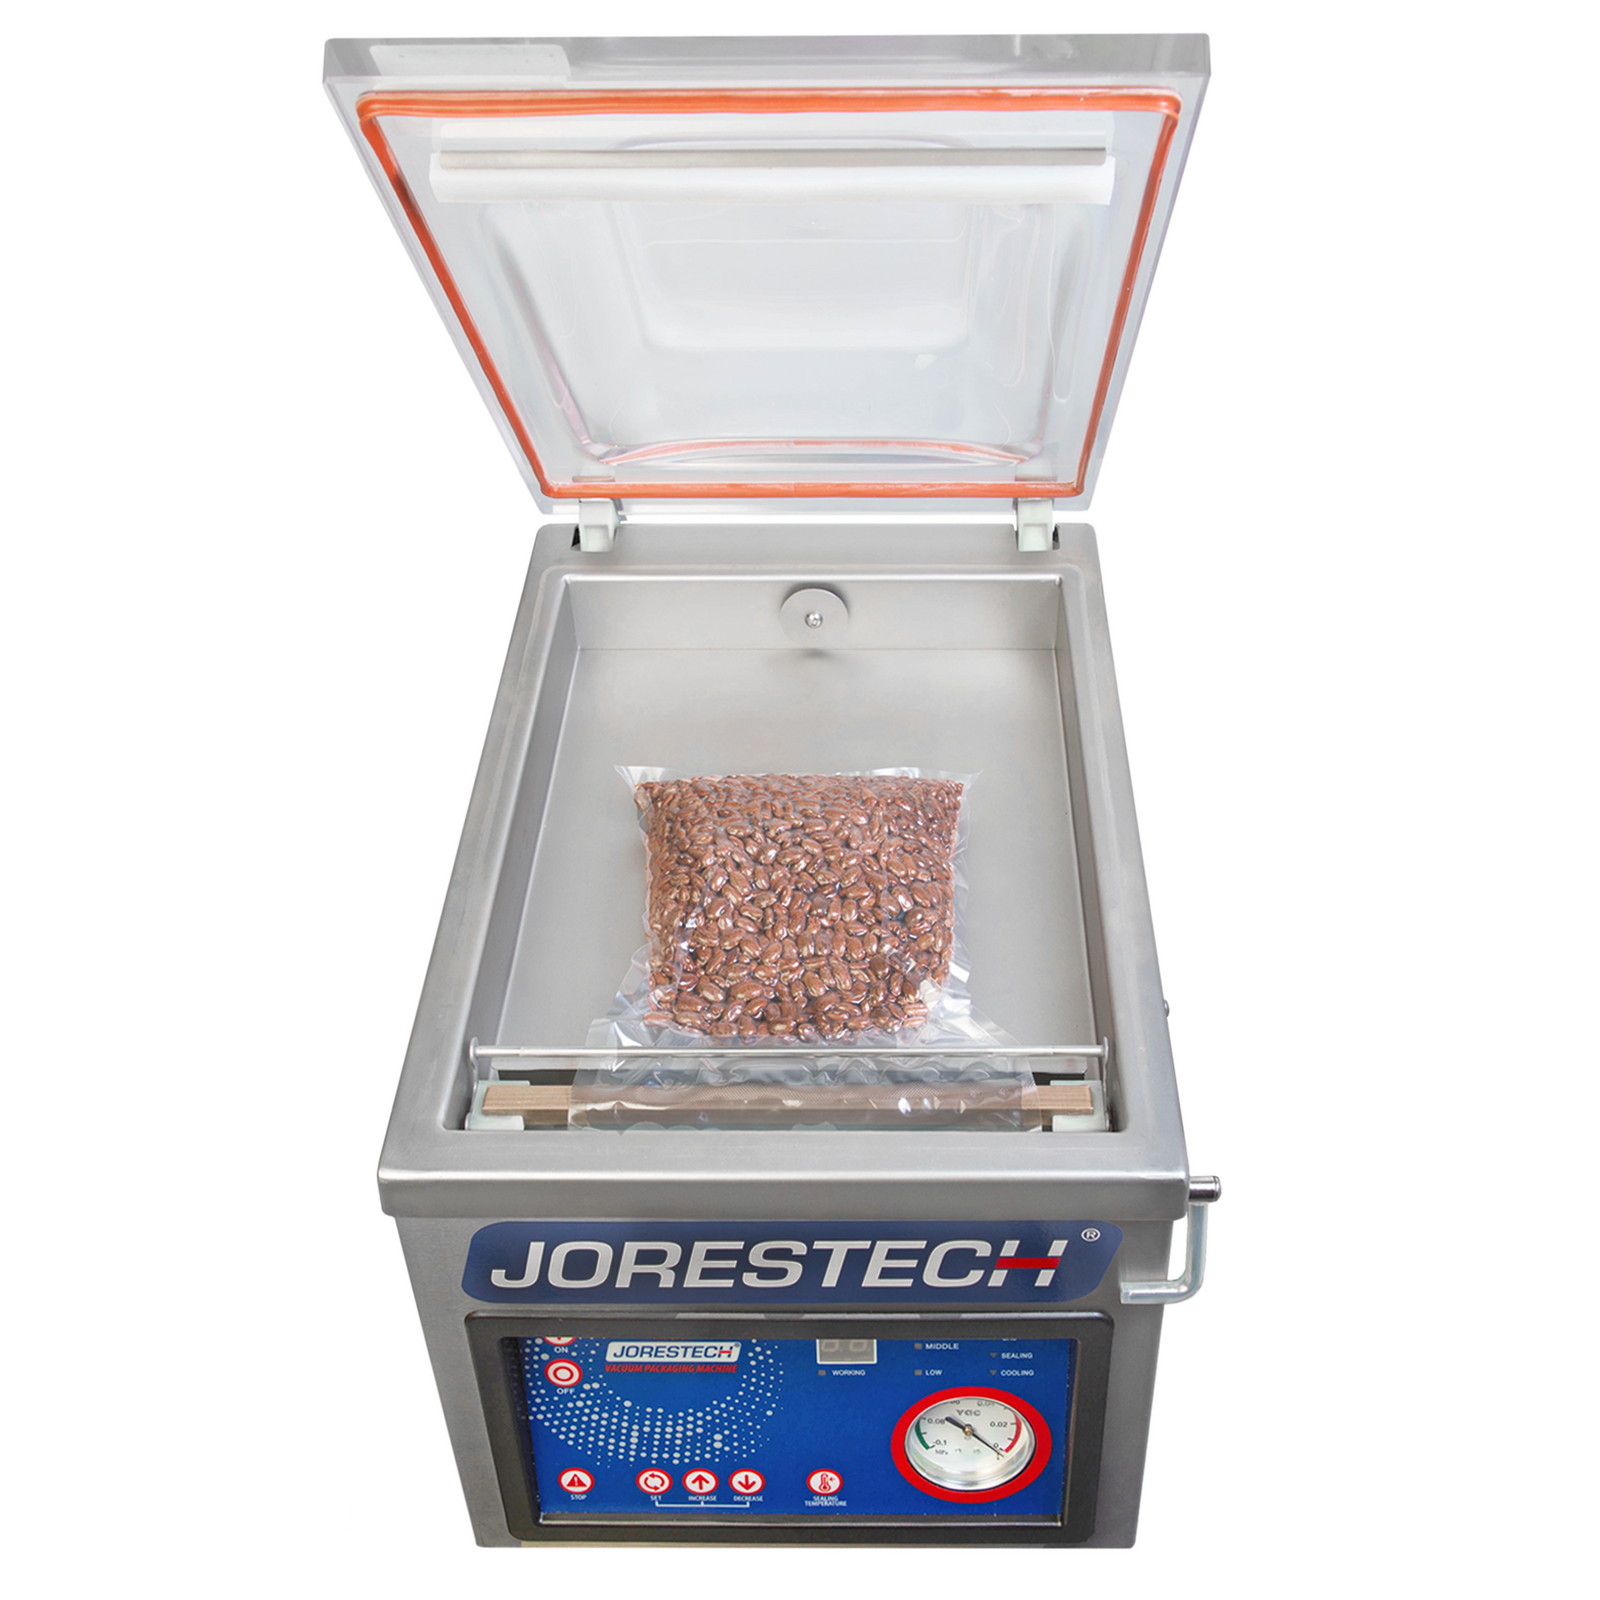 JORESTECH Chamber Vacuum Bag Sealer with Rotary Pump and Embossing Technology